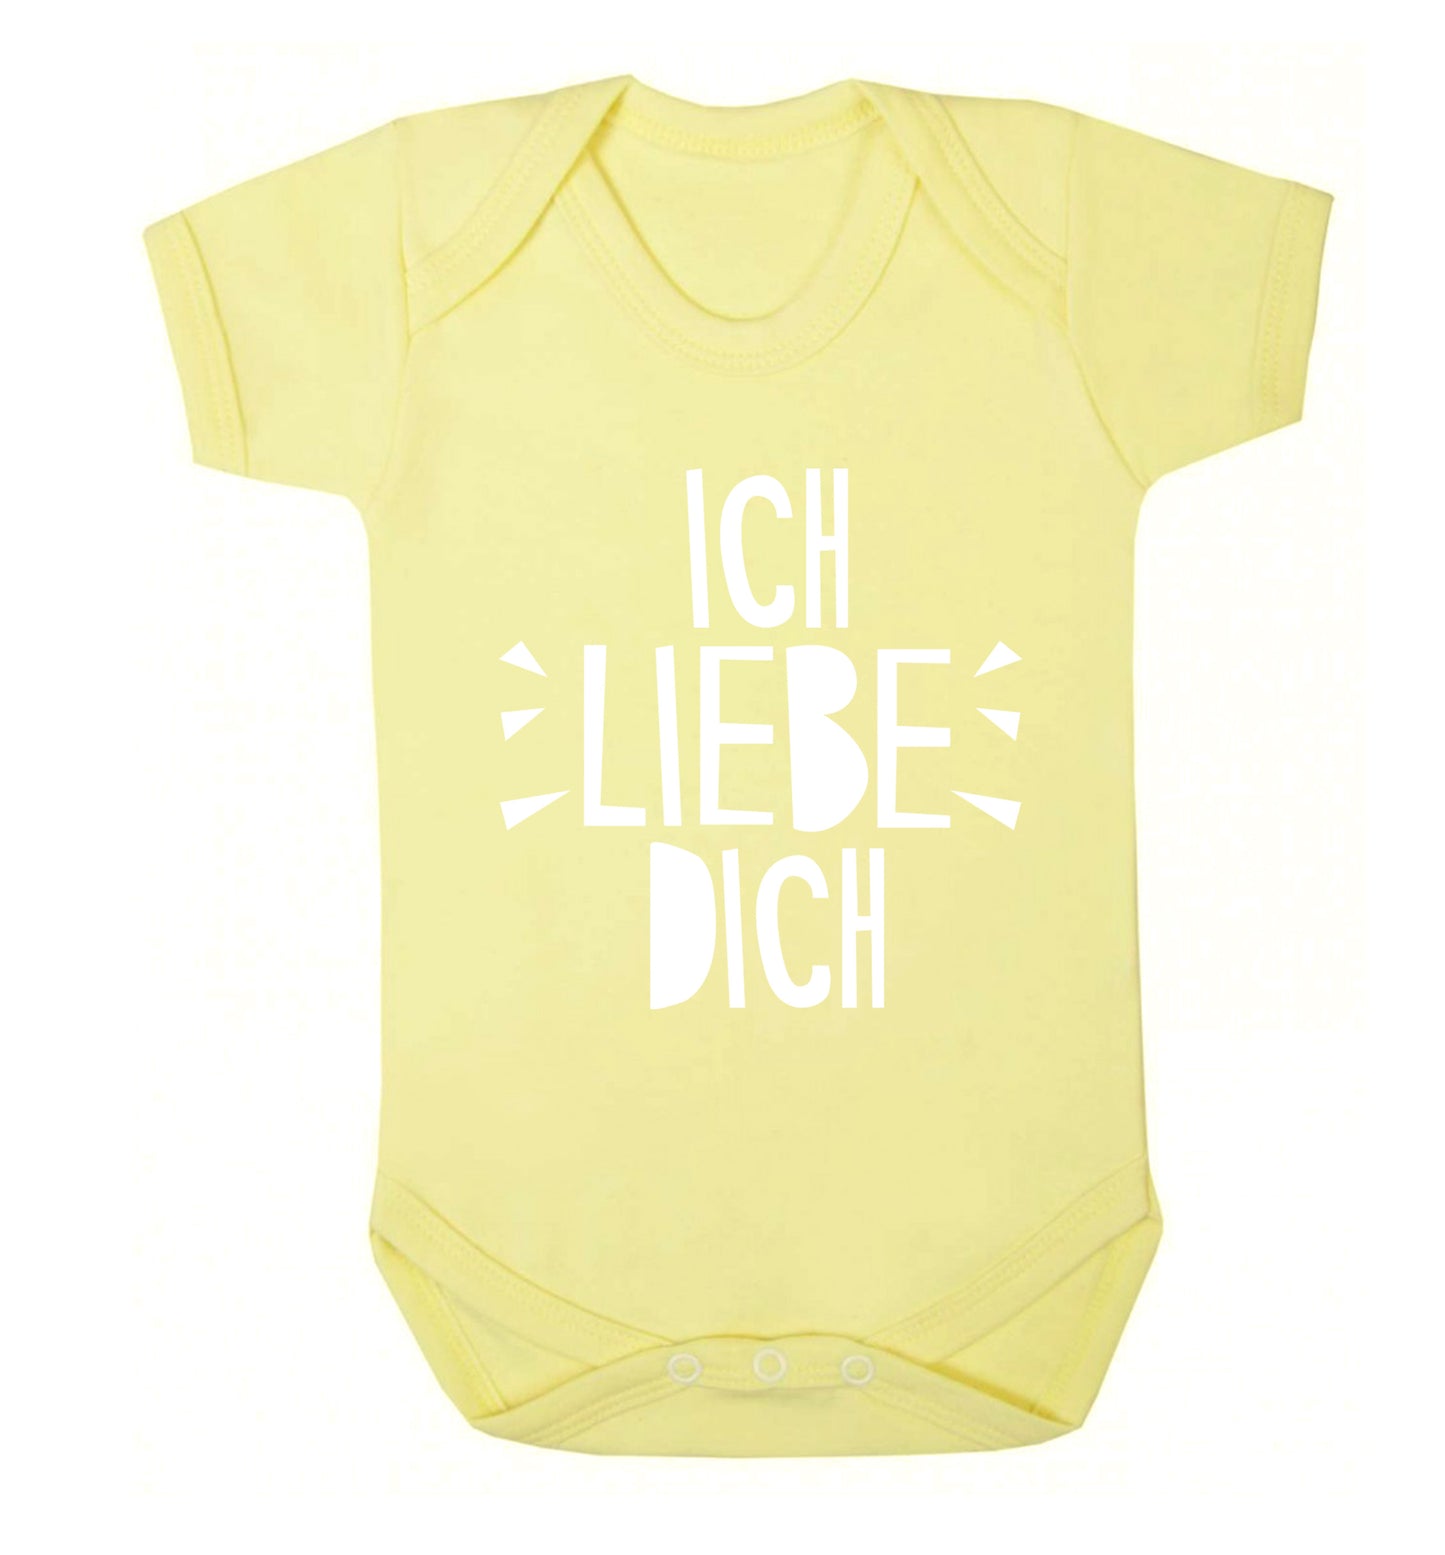 Ich liebe dich - I love you Baby Vest pale yellow 18-24 months